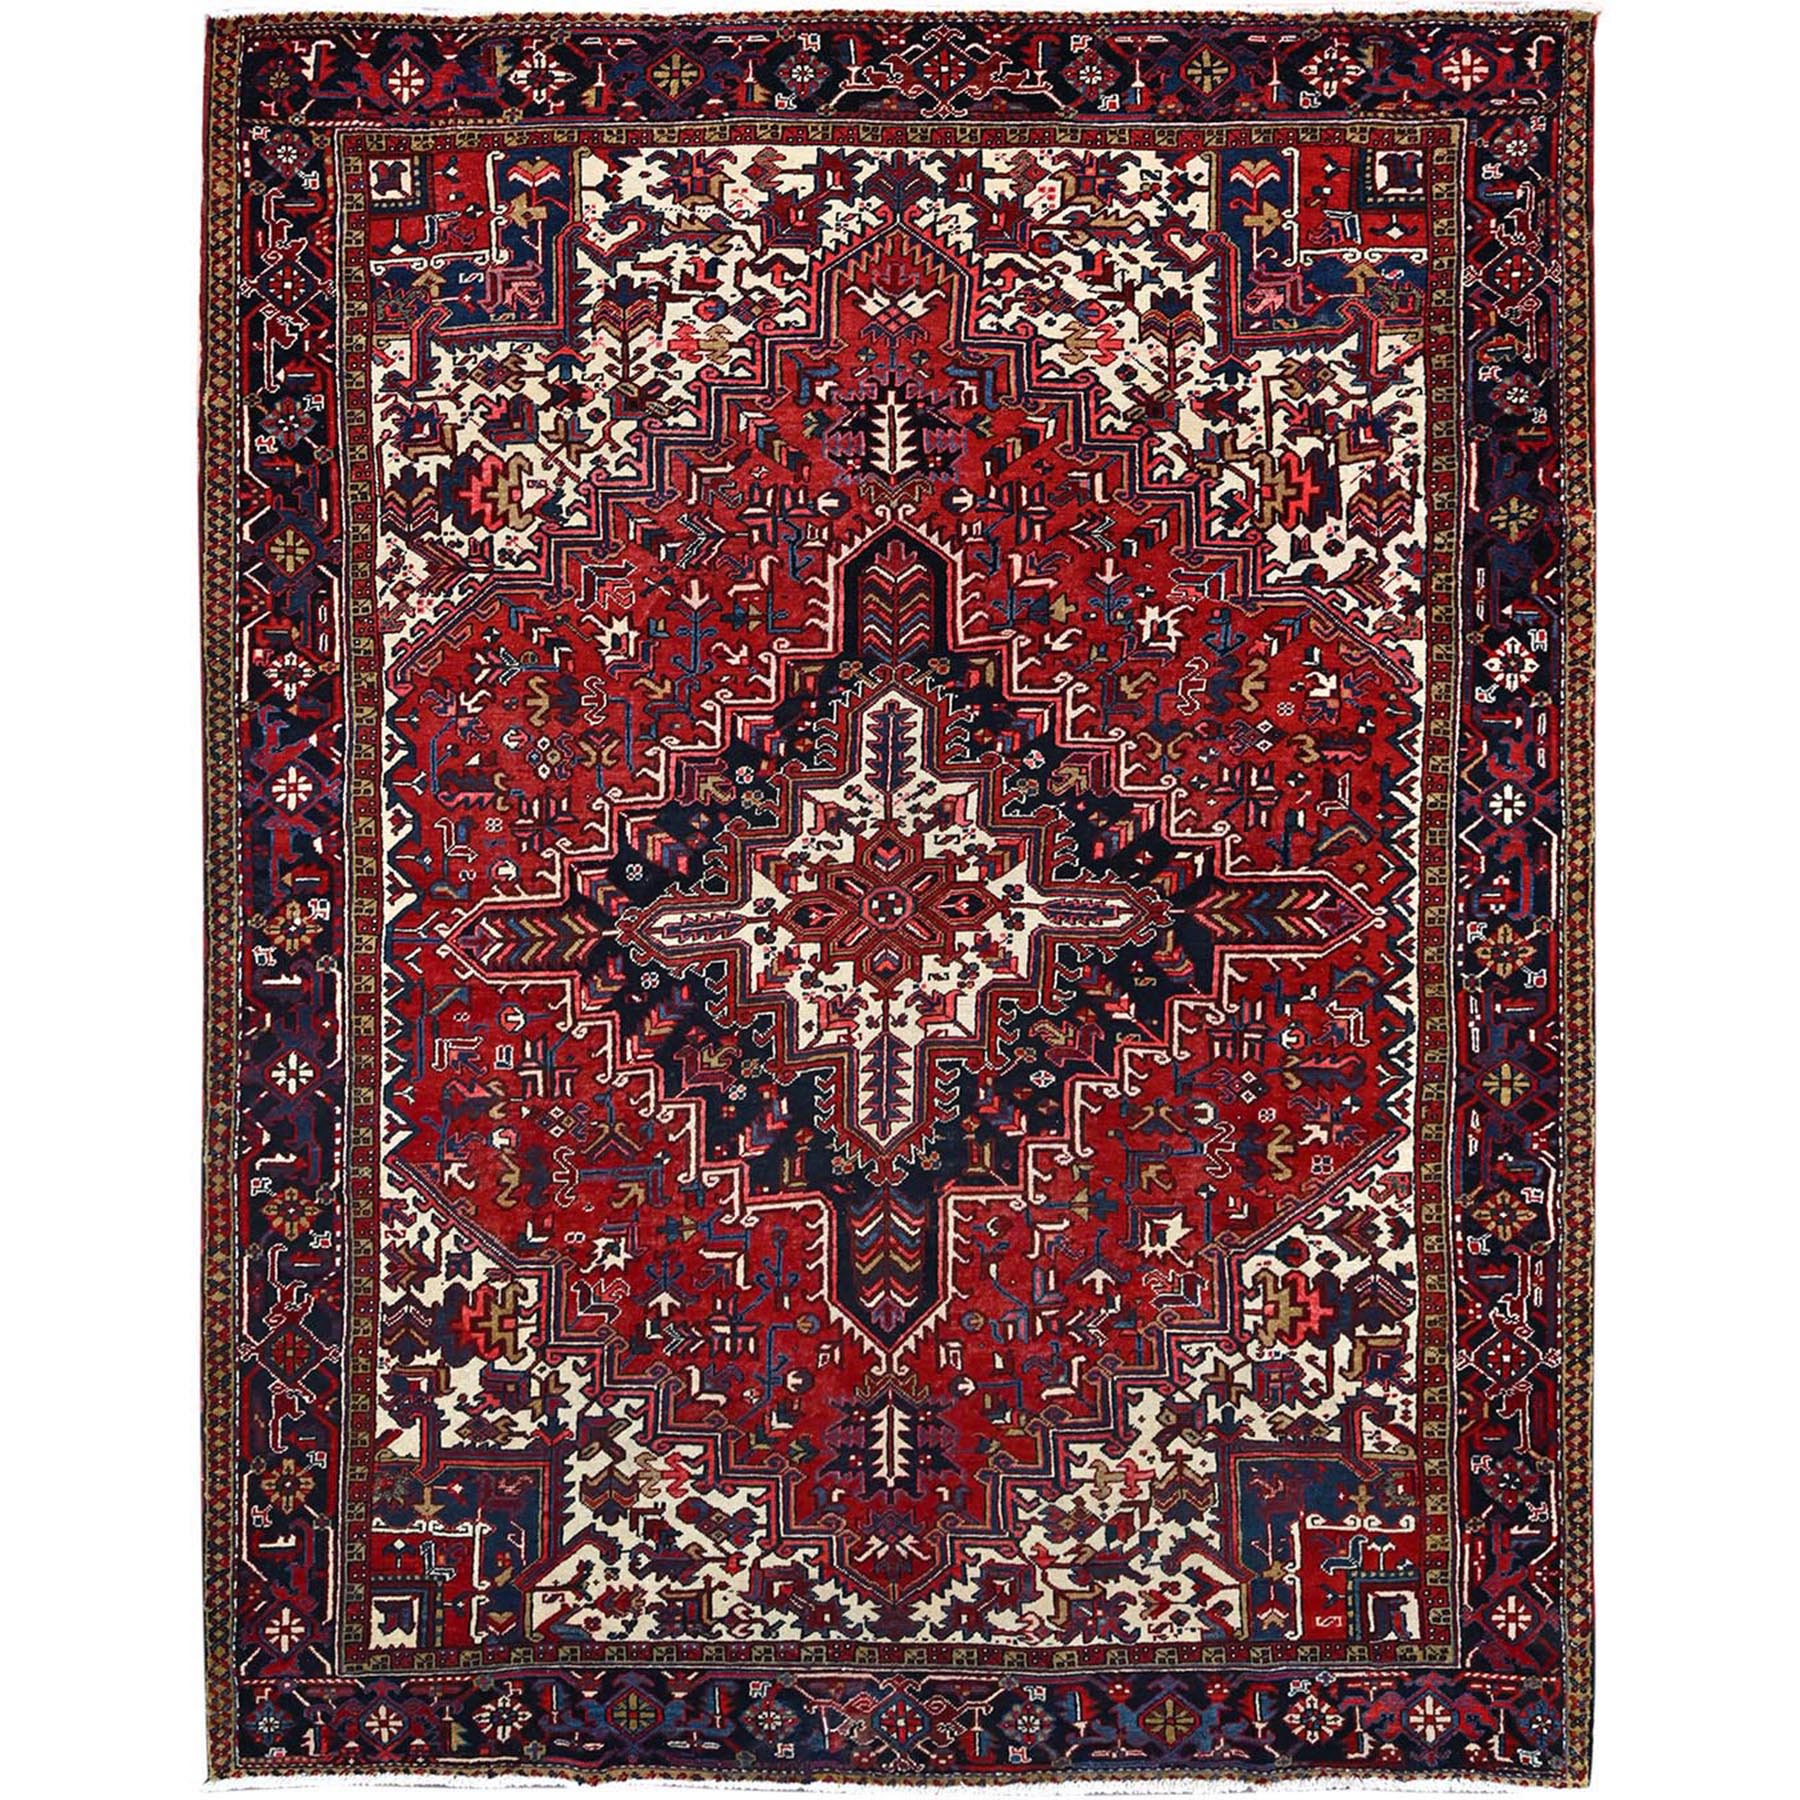  Wool Hand-Knotted Area Rug 8'11